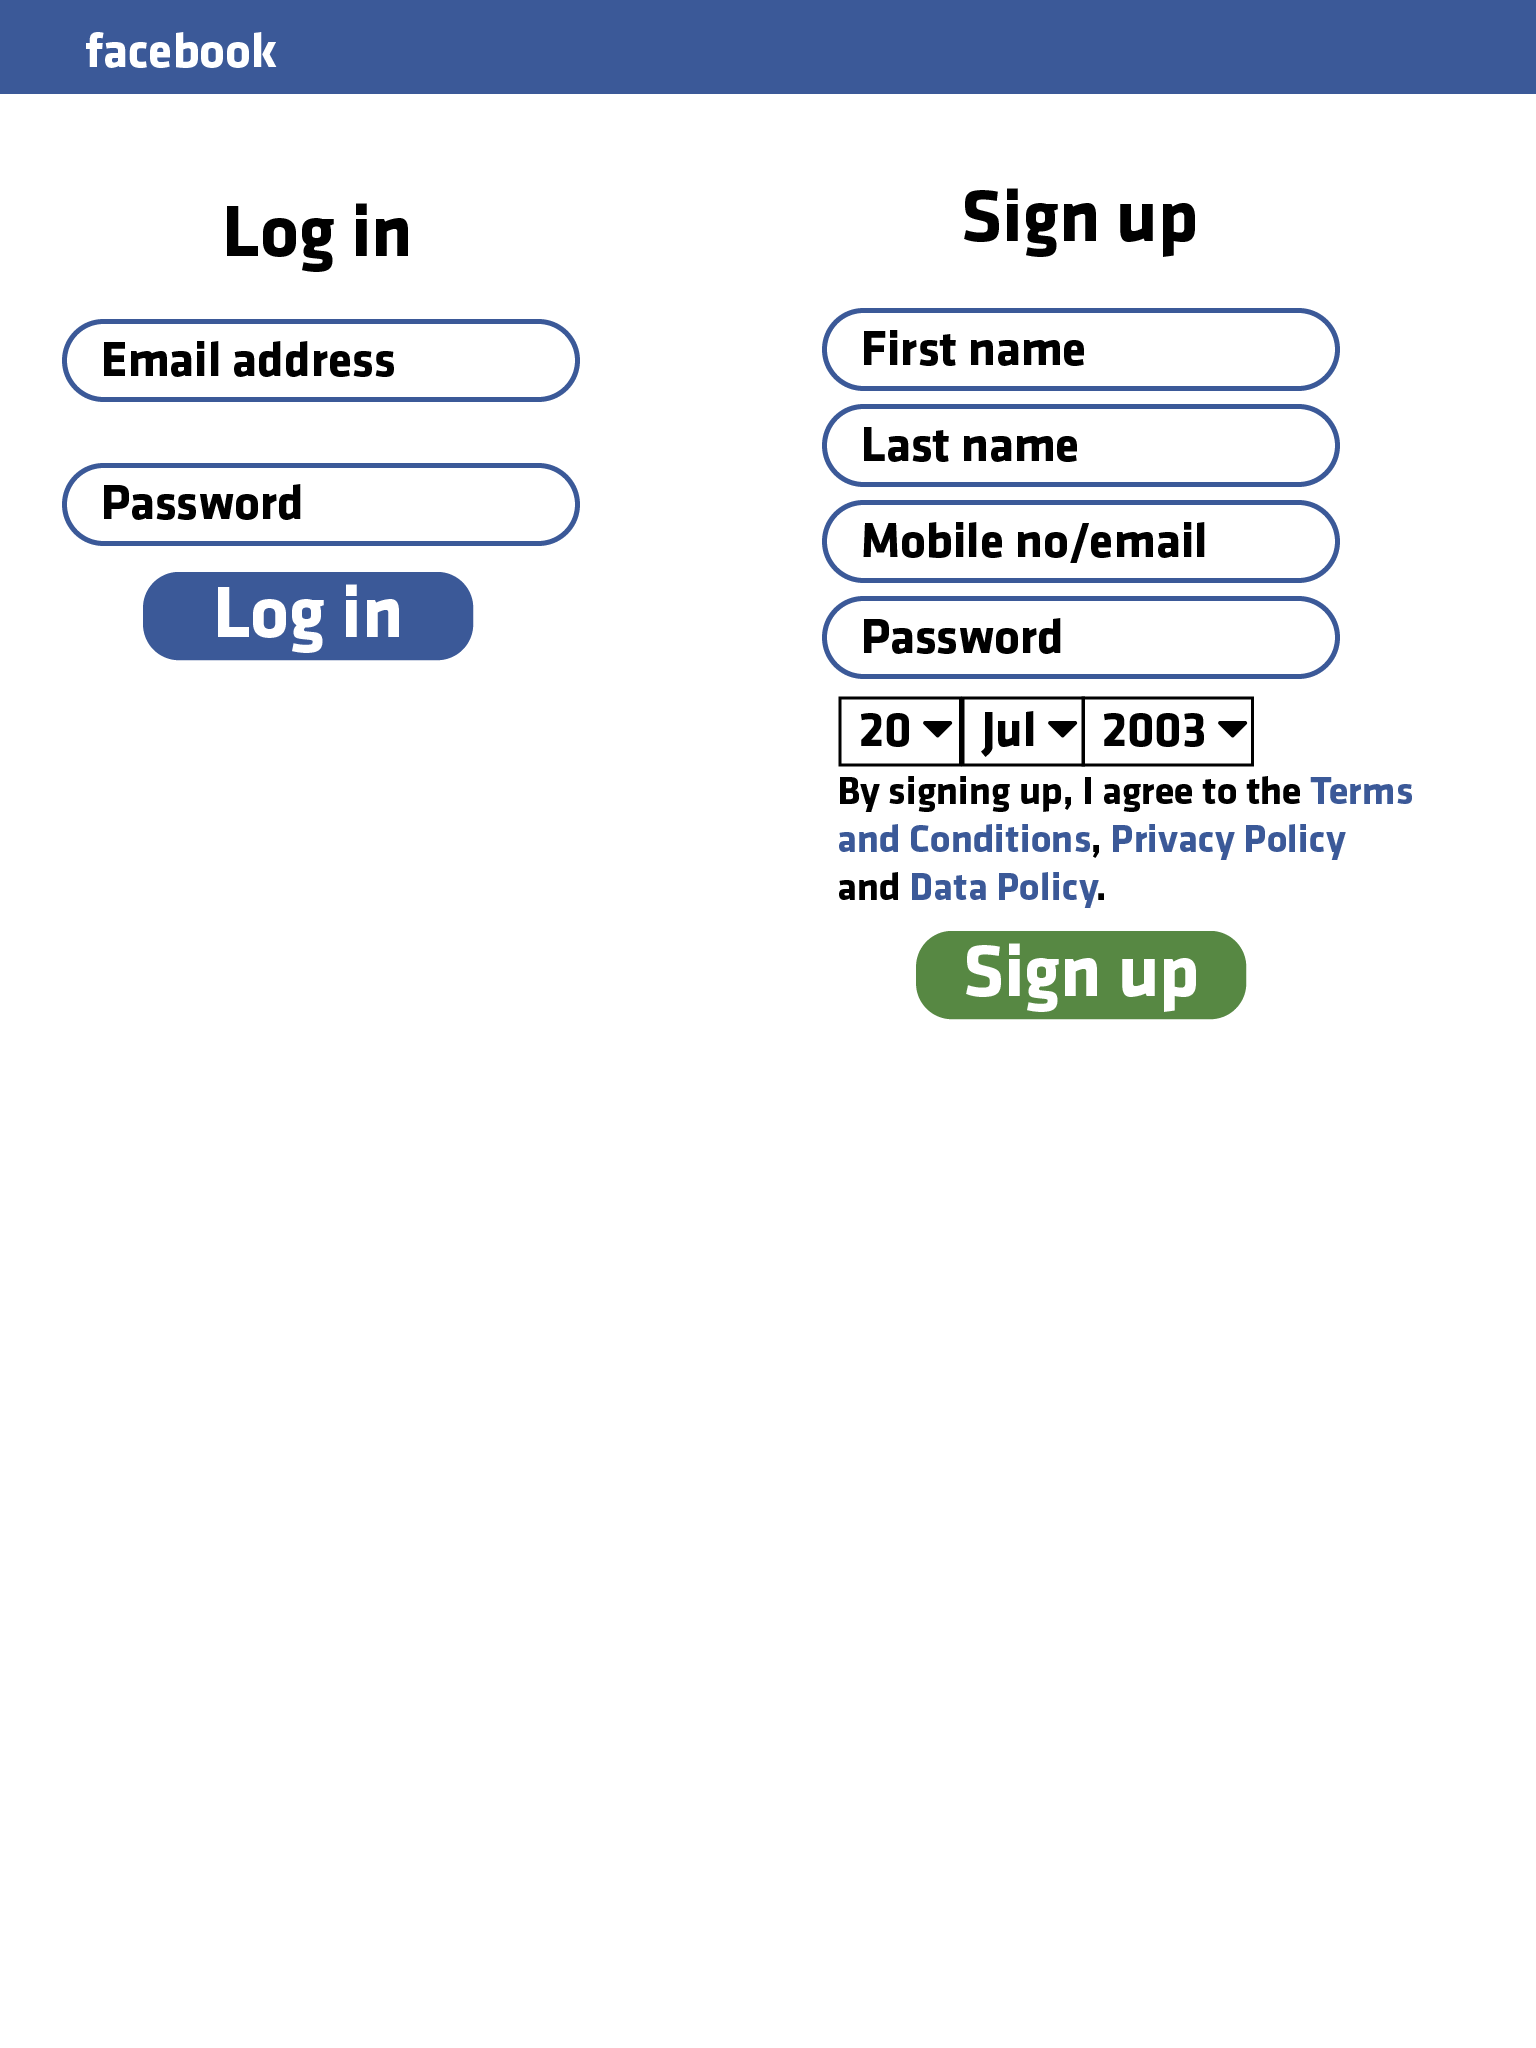 The Facebook login page